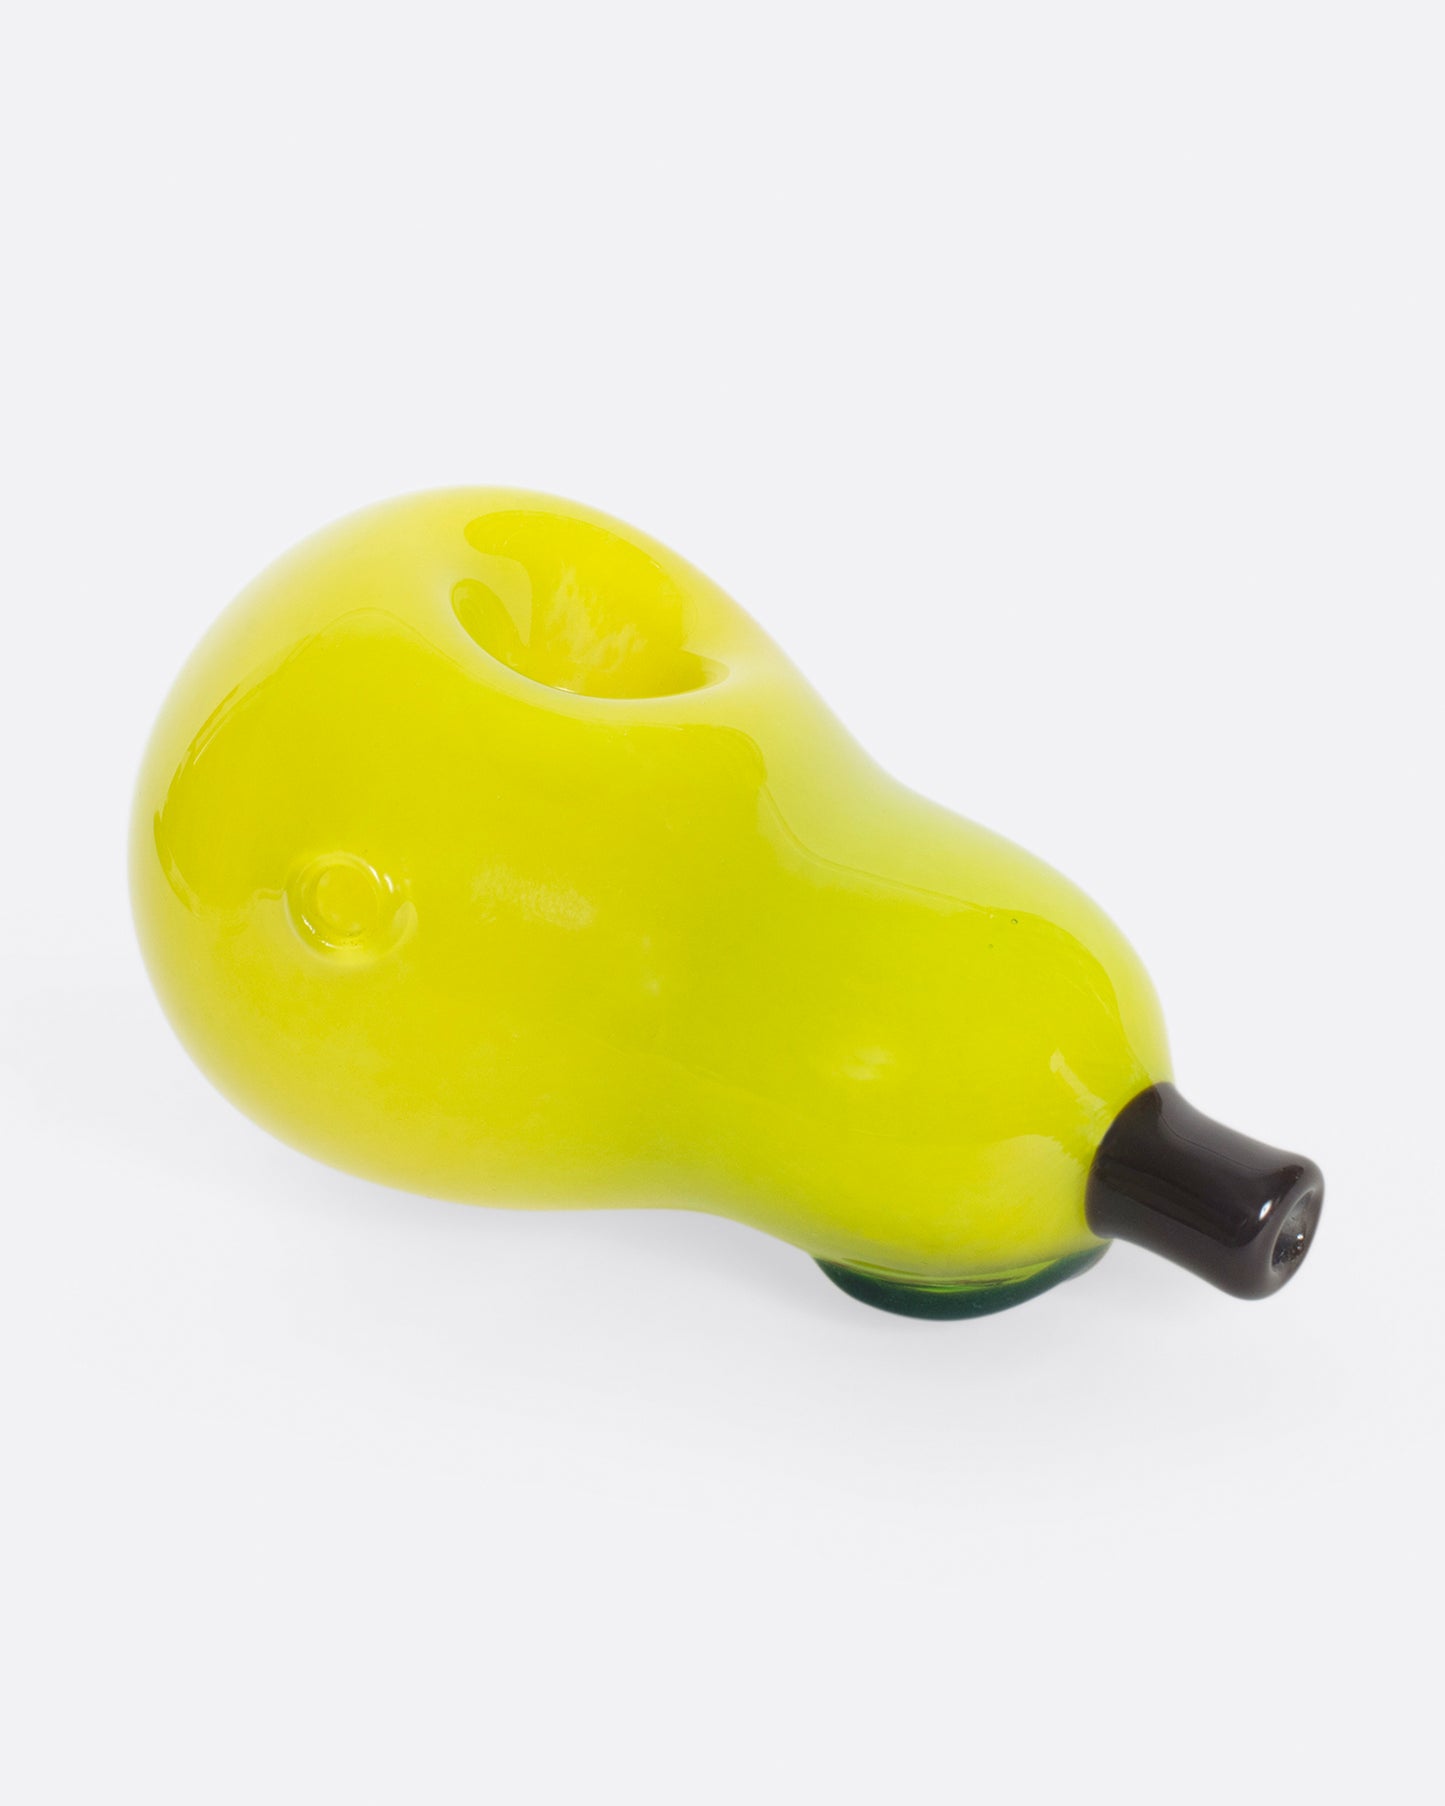 Hide this pipe in plain sight; equally cool standing or laying on its side.